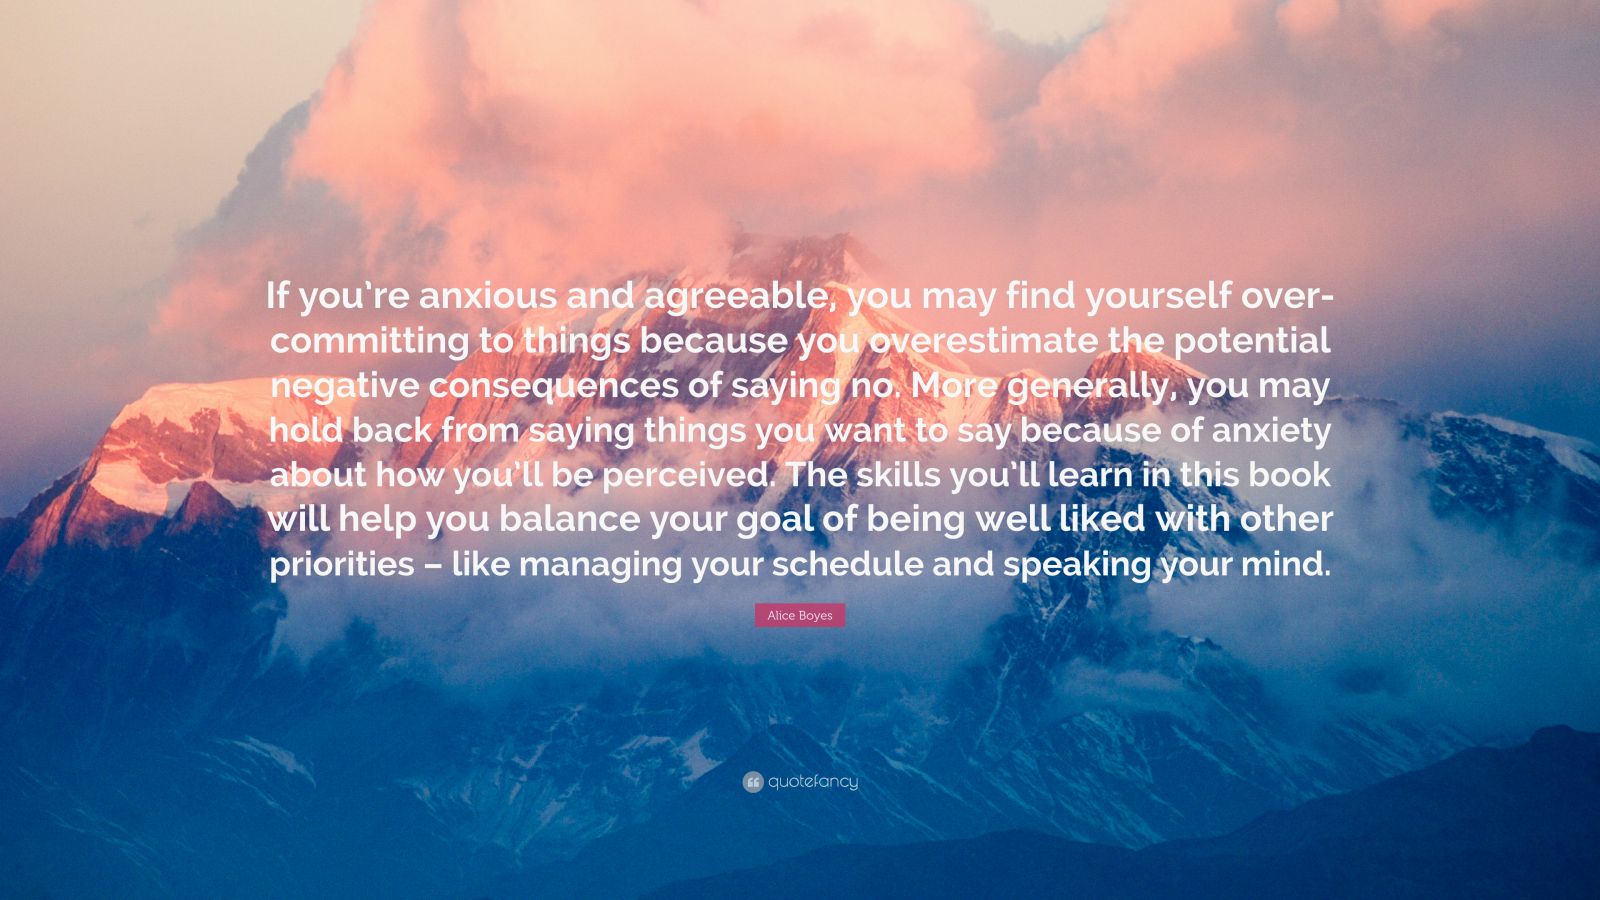 Alice Boyes Quote: “If you’re anxious and agreeable, you may find ...